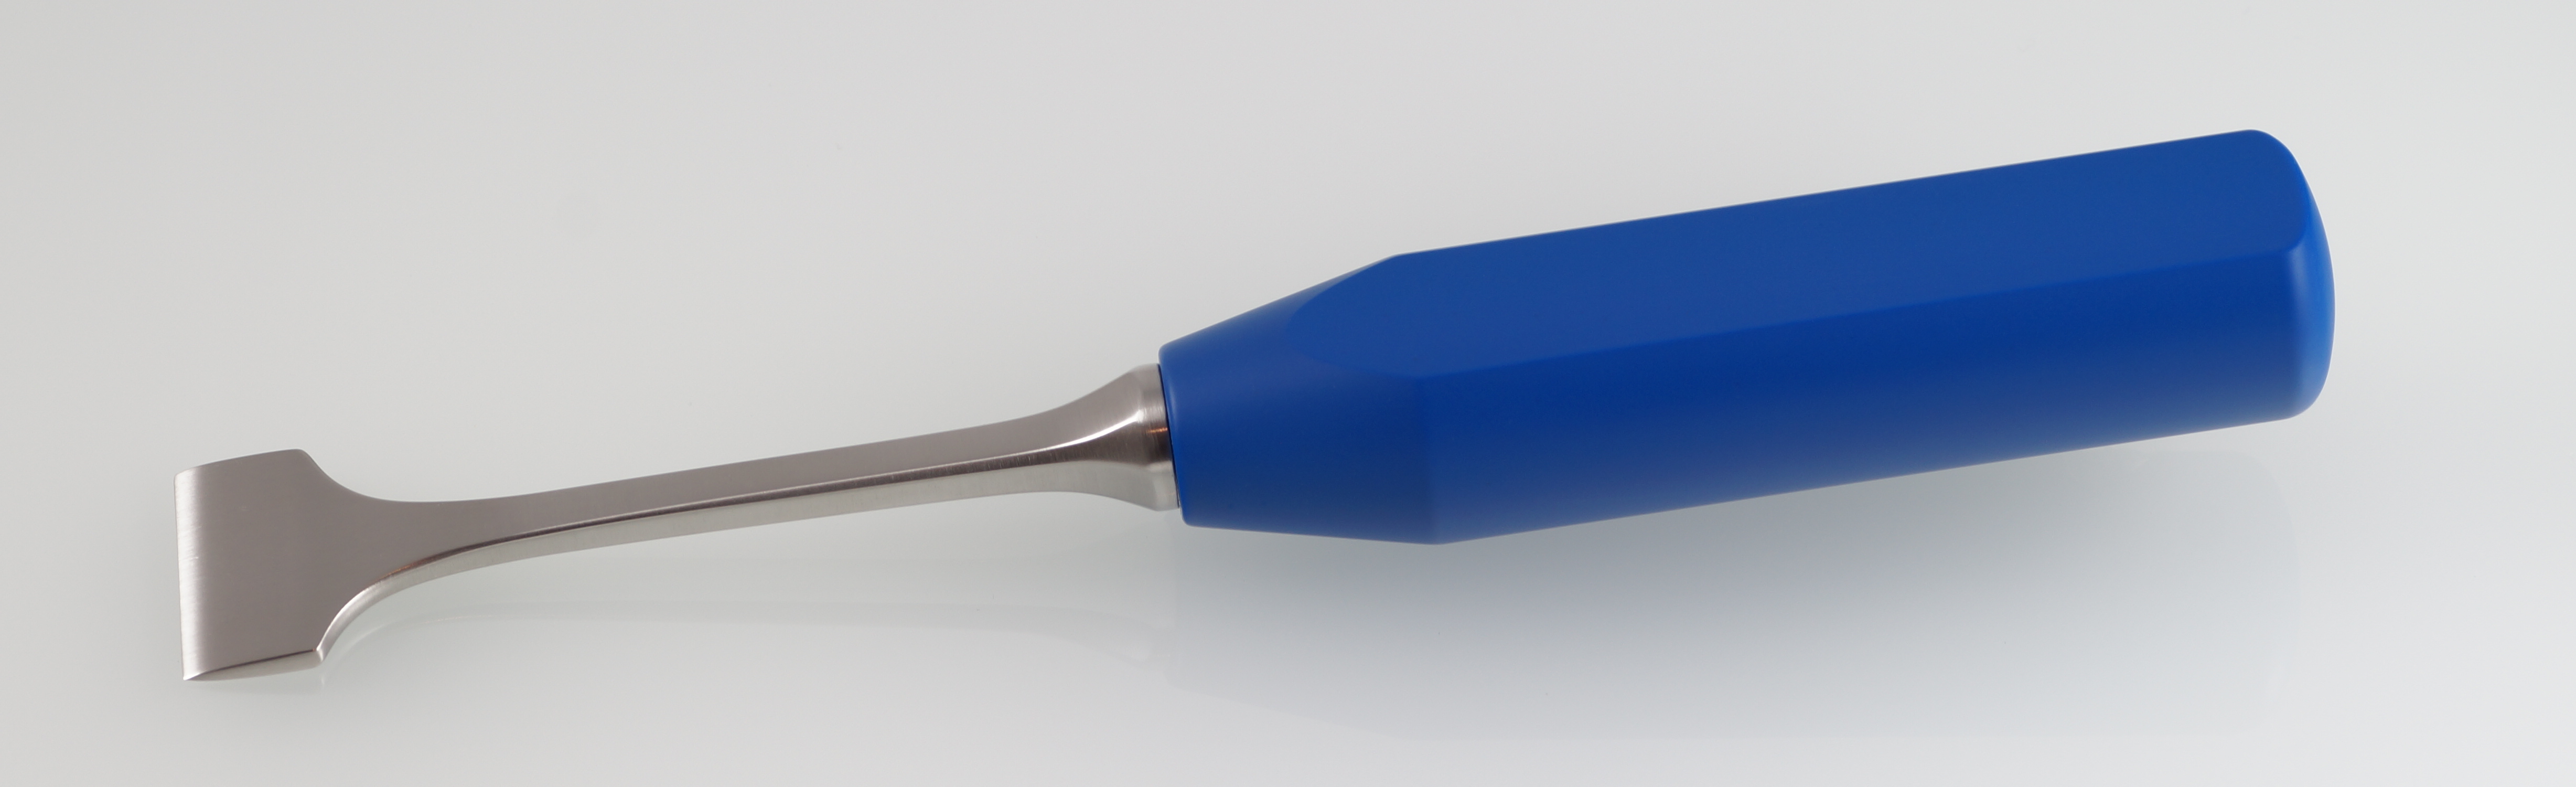 orthopedic LEXER chisel with blue handle